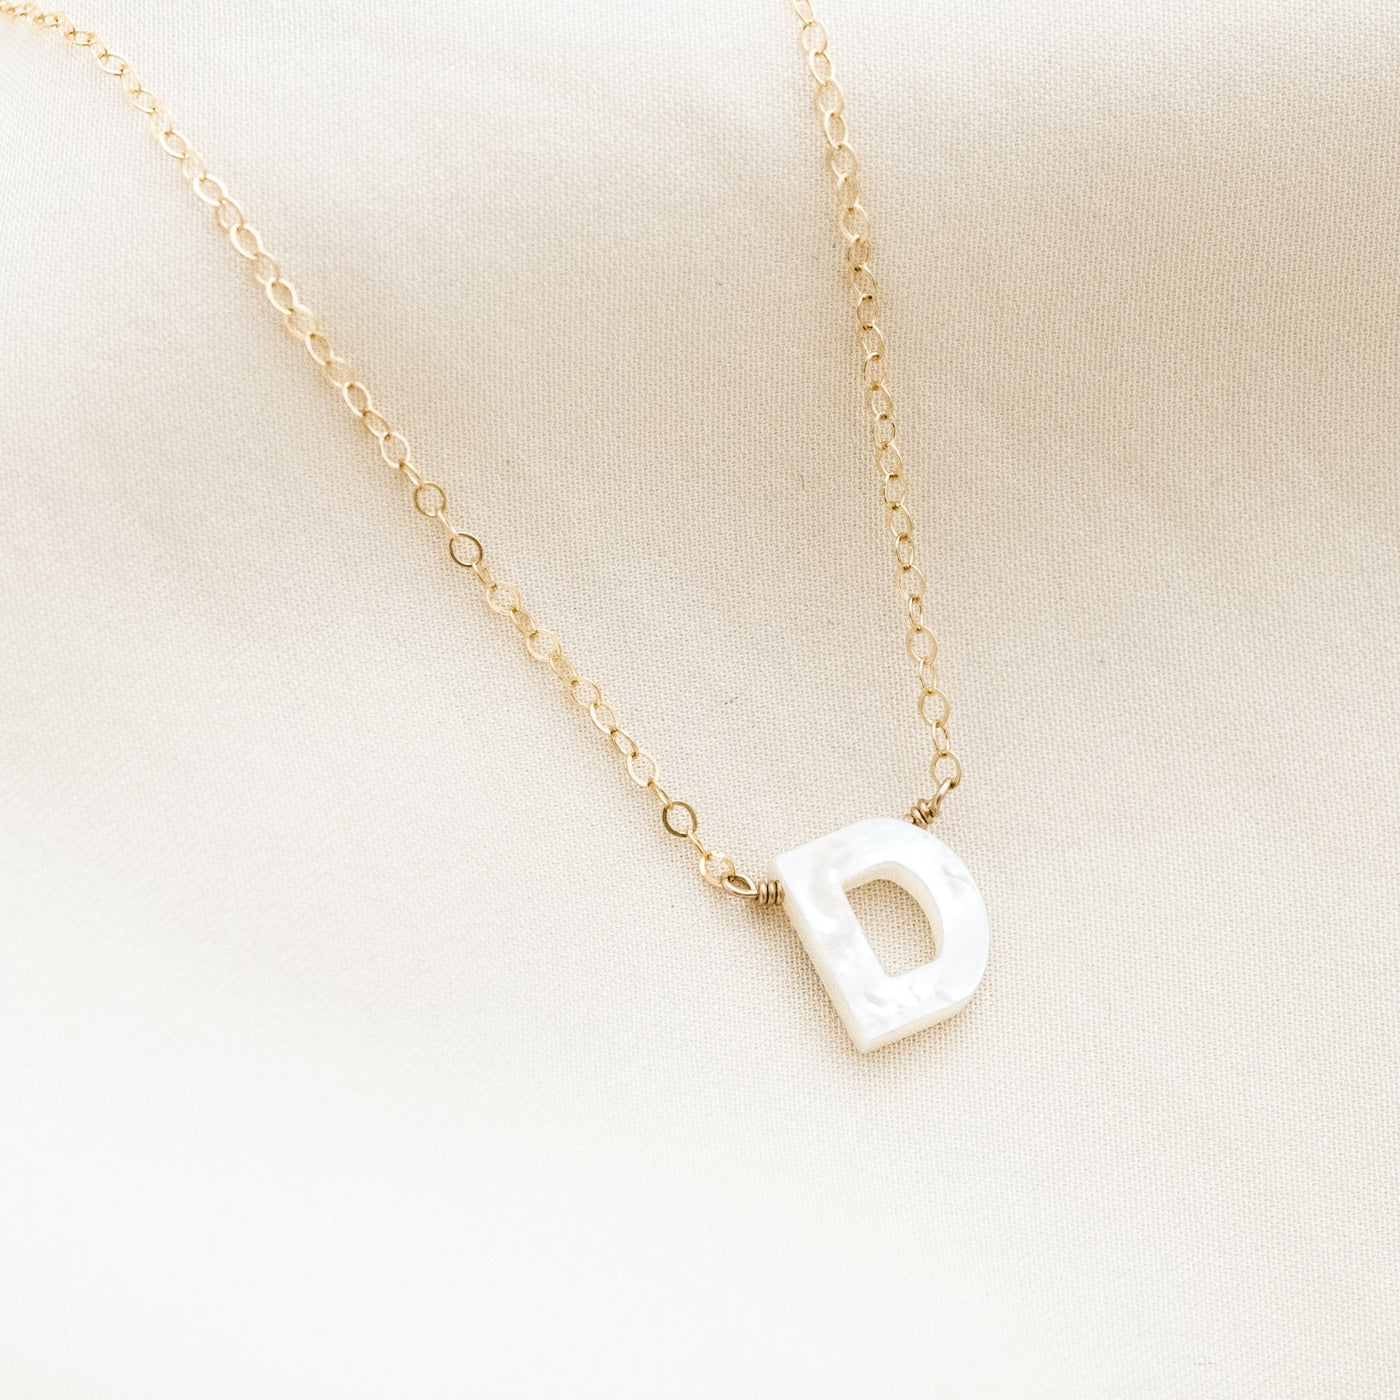 A B C D E F G H I J K L M N O P Q R S T U V W X Y Z Pearl Initial Necklace Pearl Initial Necklace | Simple & Dainty Jewelry